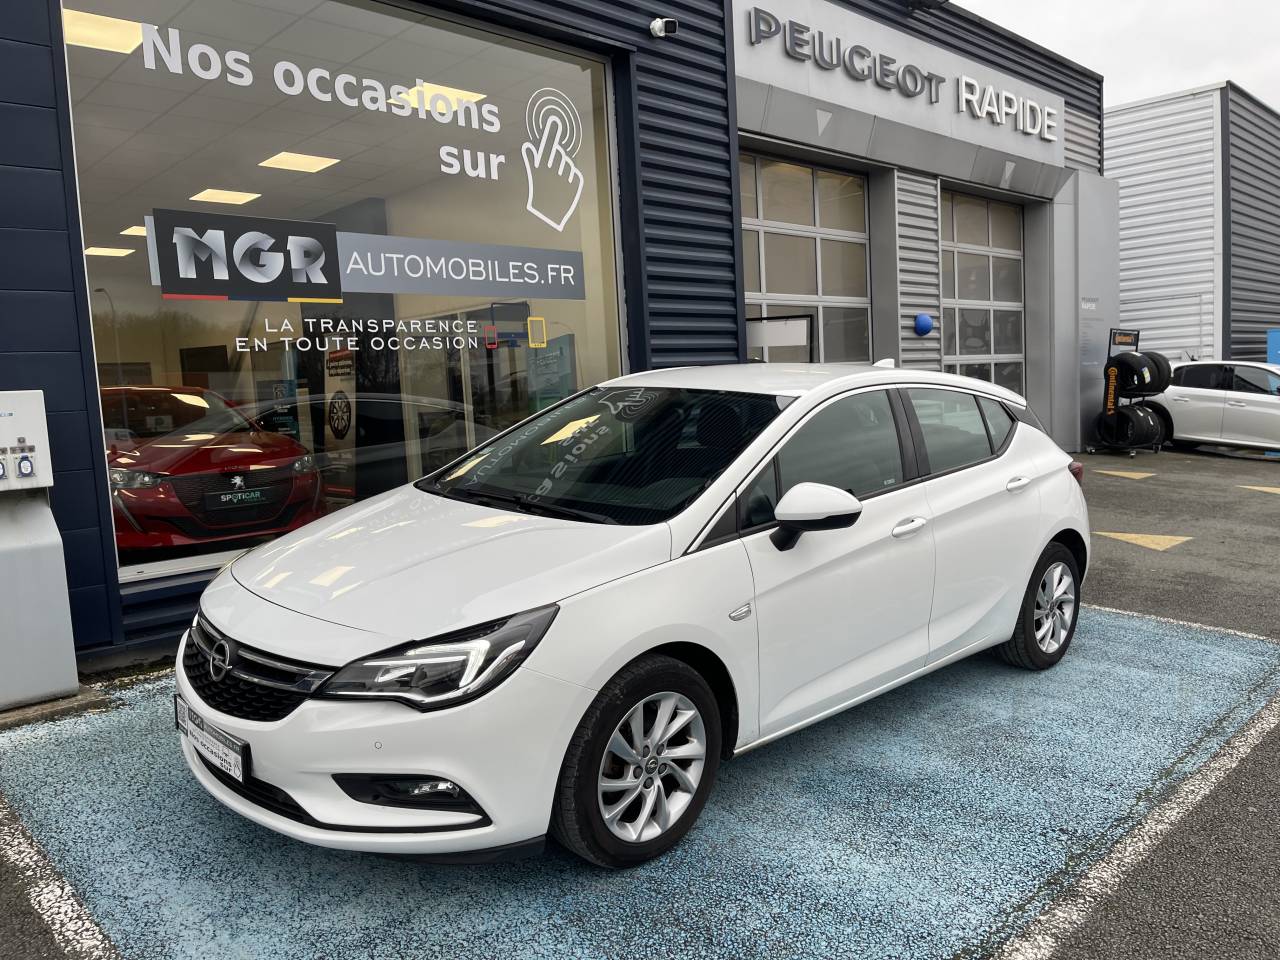 Opel Astra innovation a occasion : annonces achat, vente de voitures